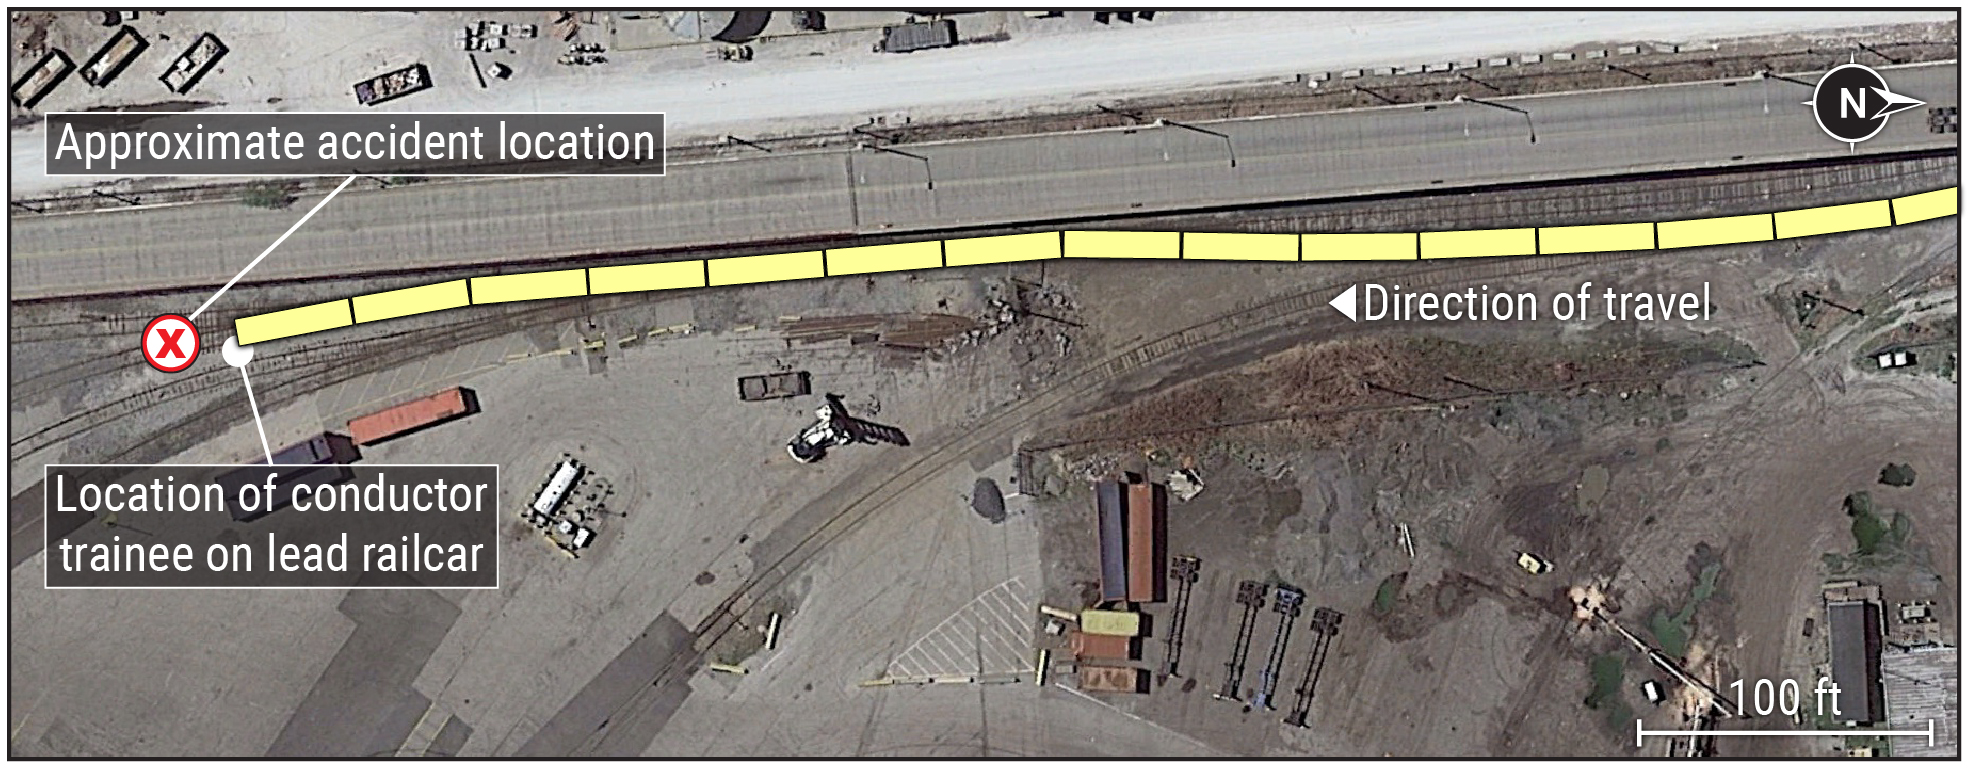 Figure 1. Illustrated aerial view of accident scene. (Source: Google Earth.)